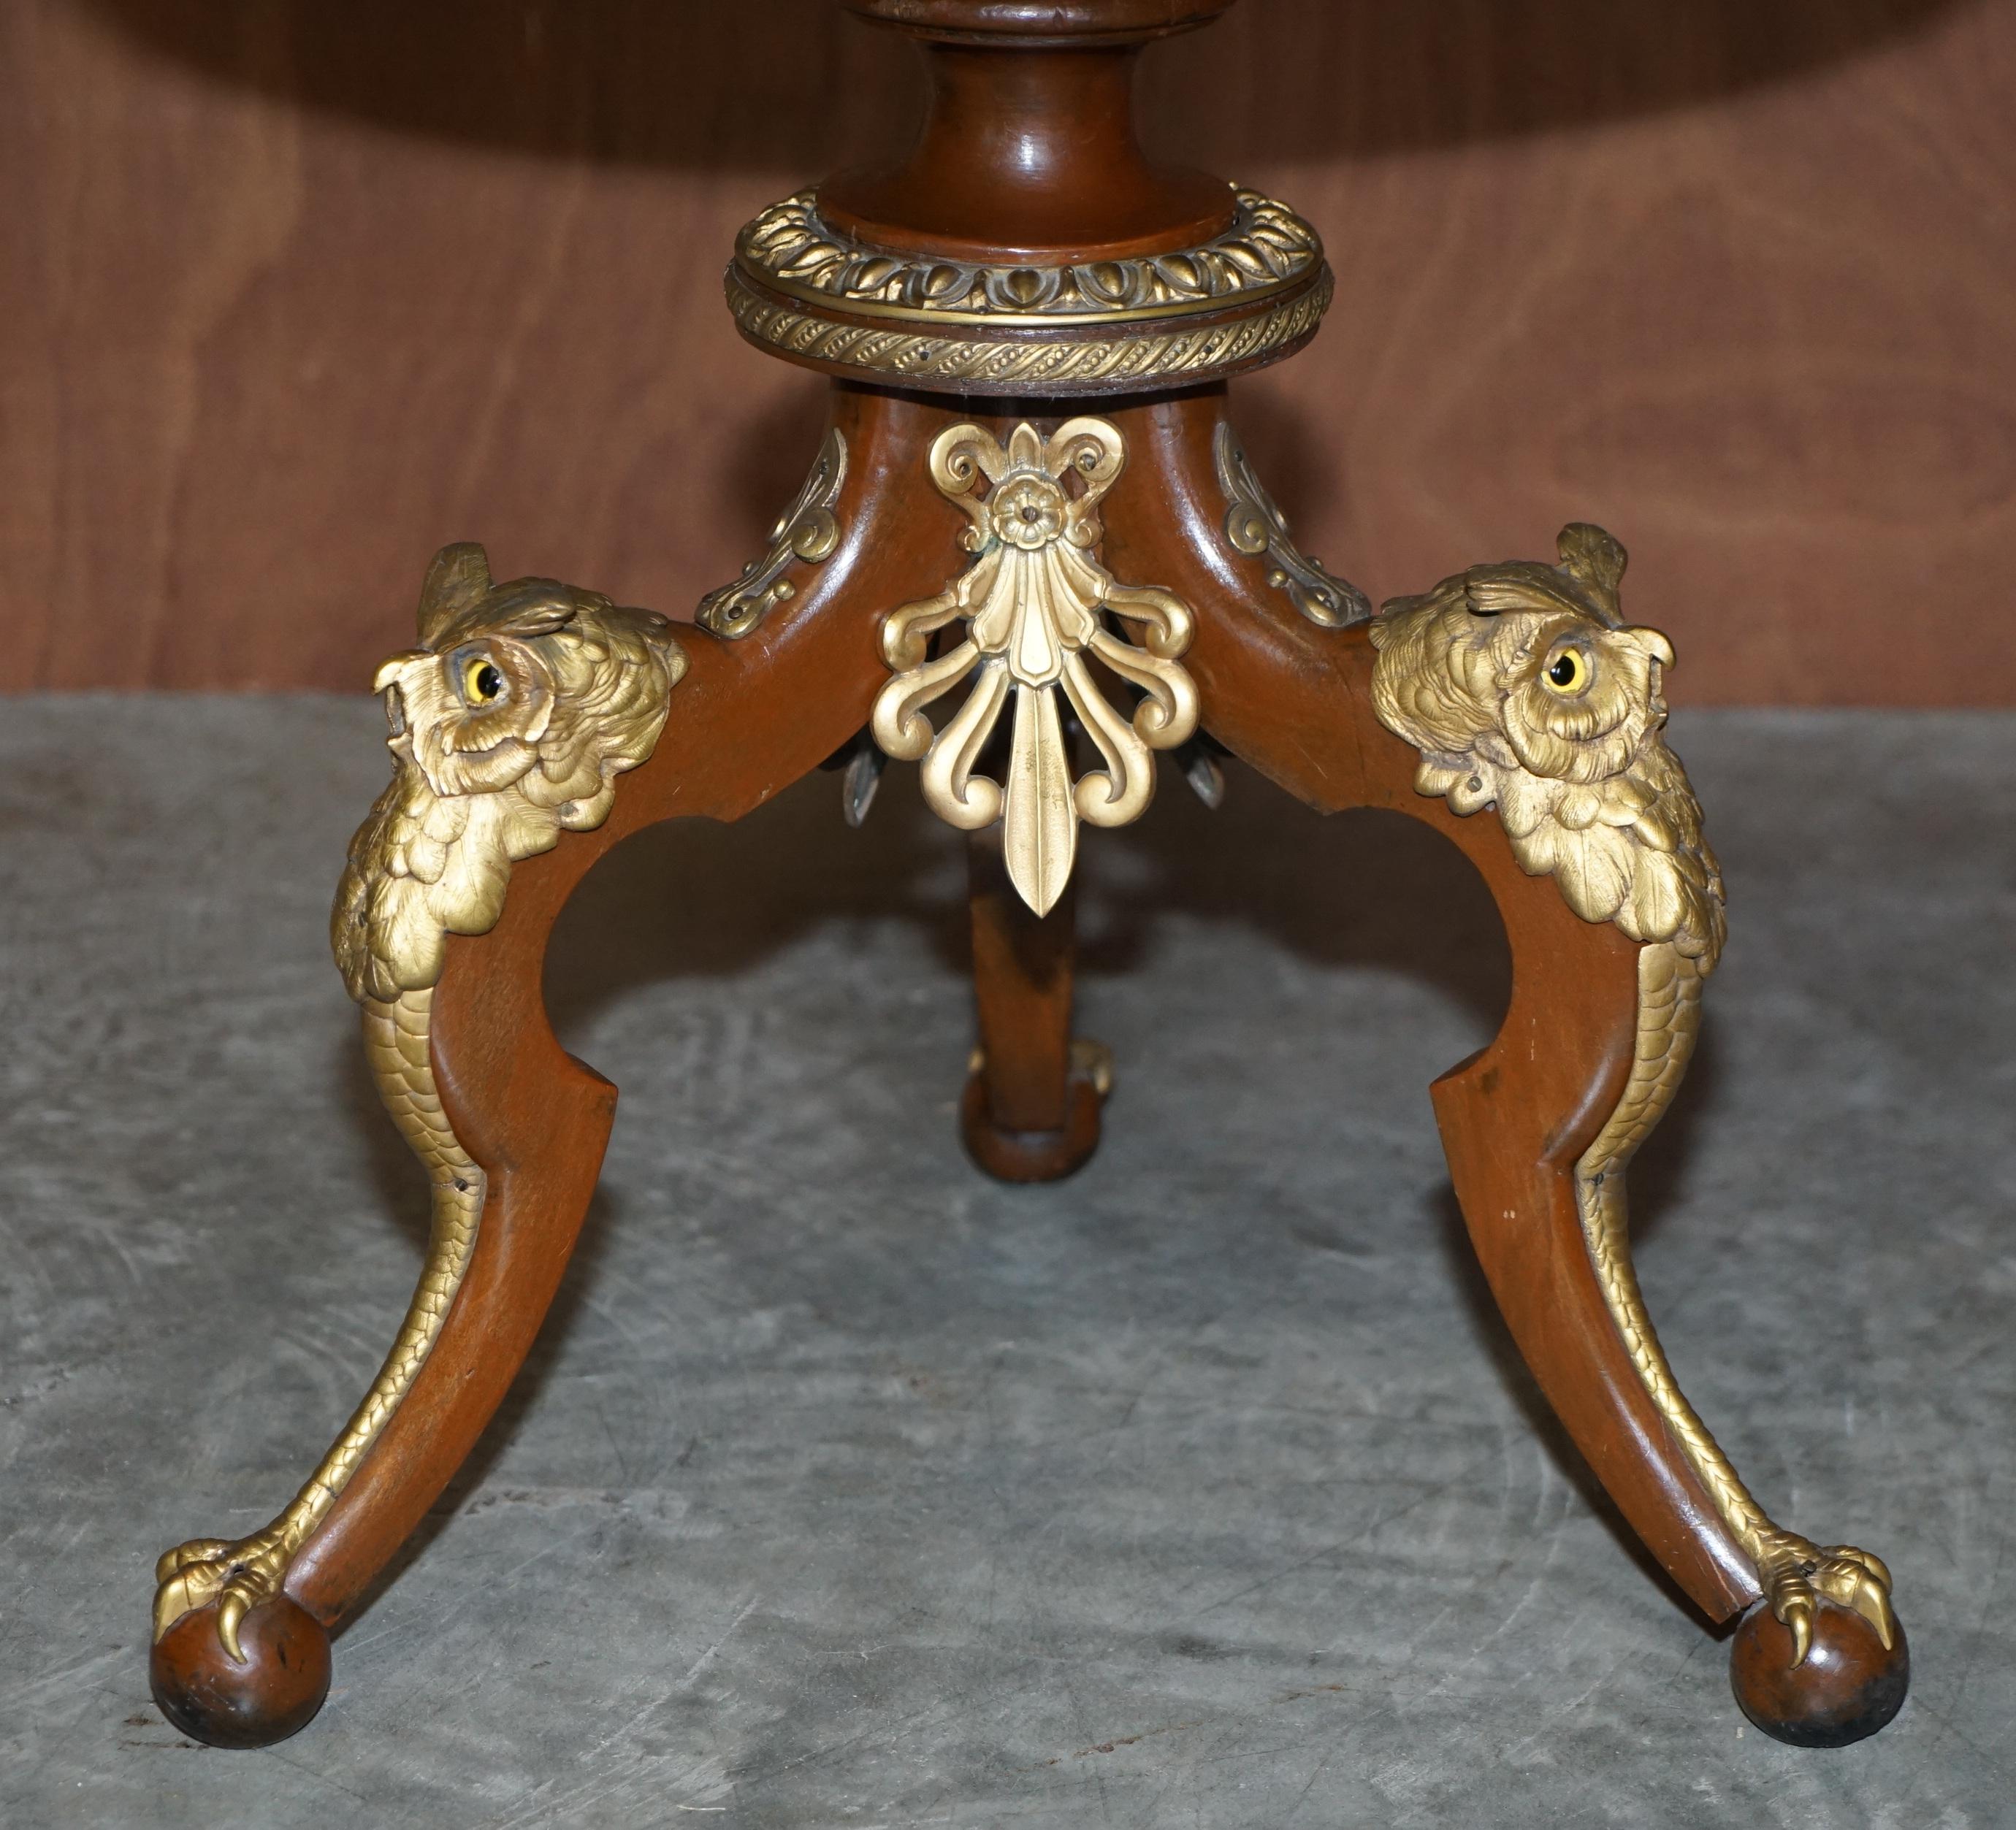 Victorian Stunning Gilt Bronze Owl Mounted Side End Lamp Table Claw & Ball Feet Glass Eyes